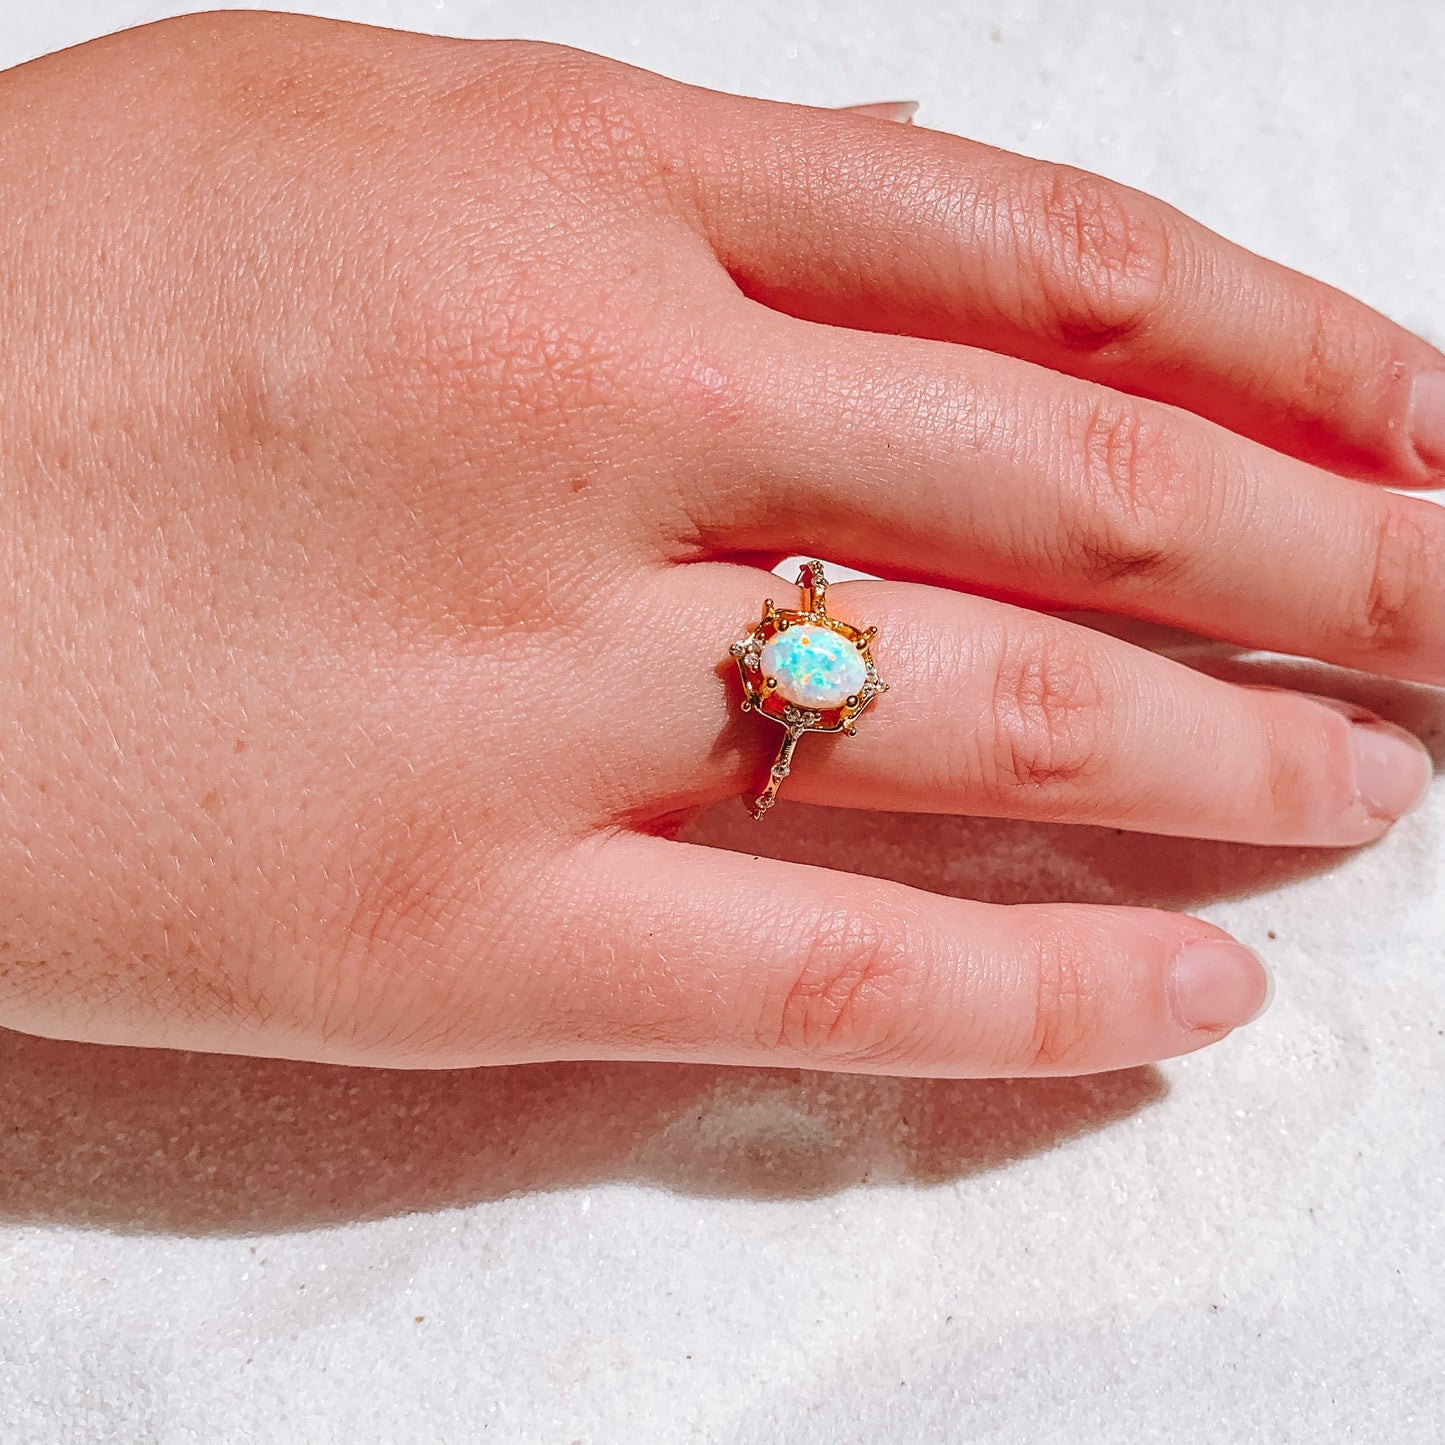 Vintage Opal Ring  | Stirling Silver Opal Ring | White Fire Opal | Vintage Inspired Opal Ring  | Vintage Style Ring | Antique Opal Ring